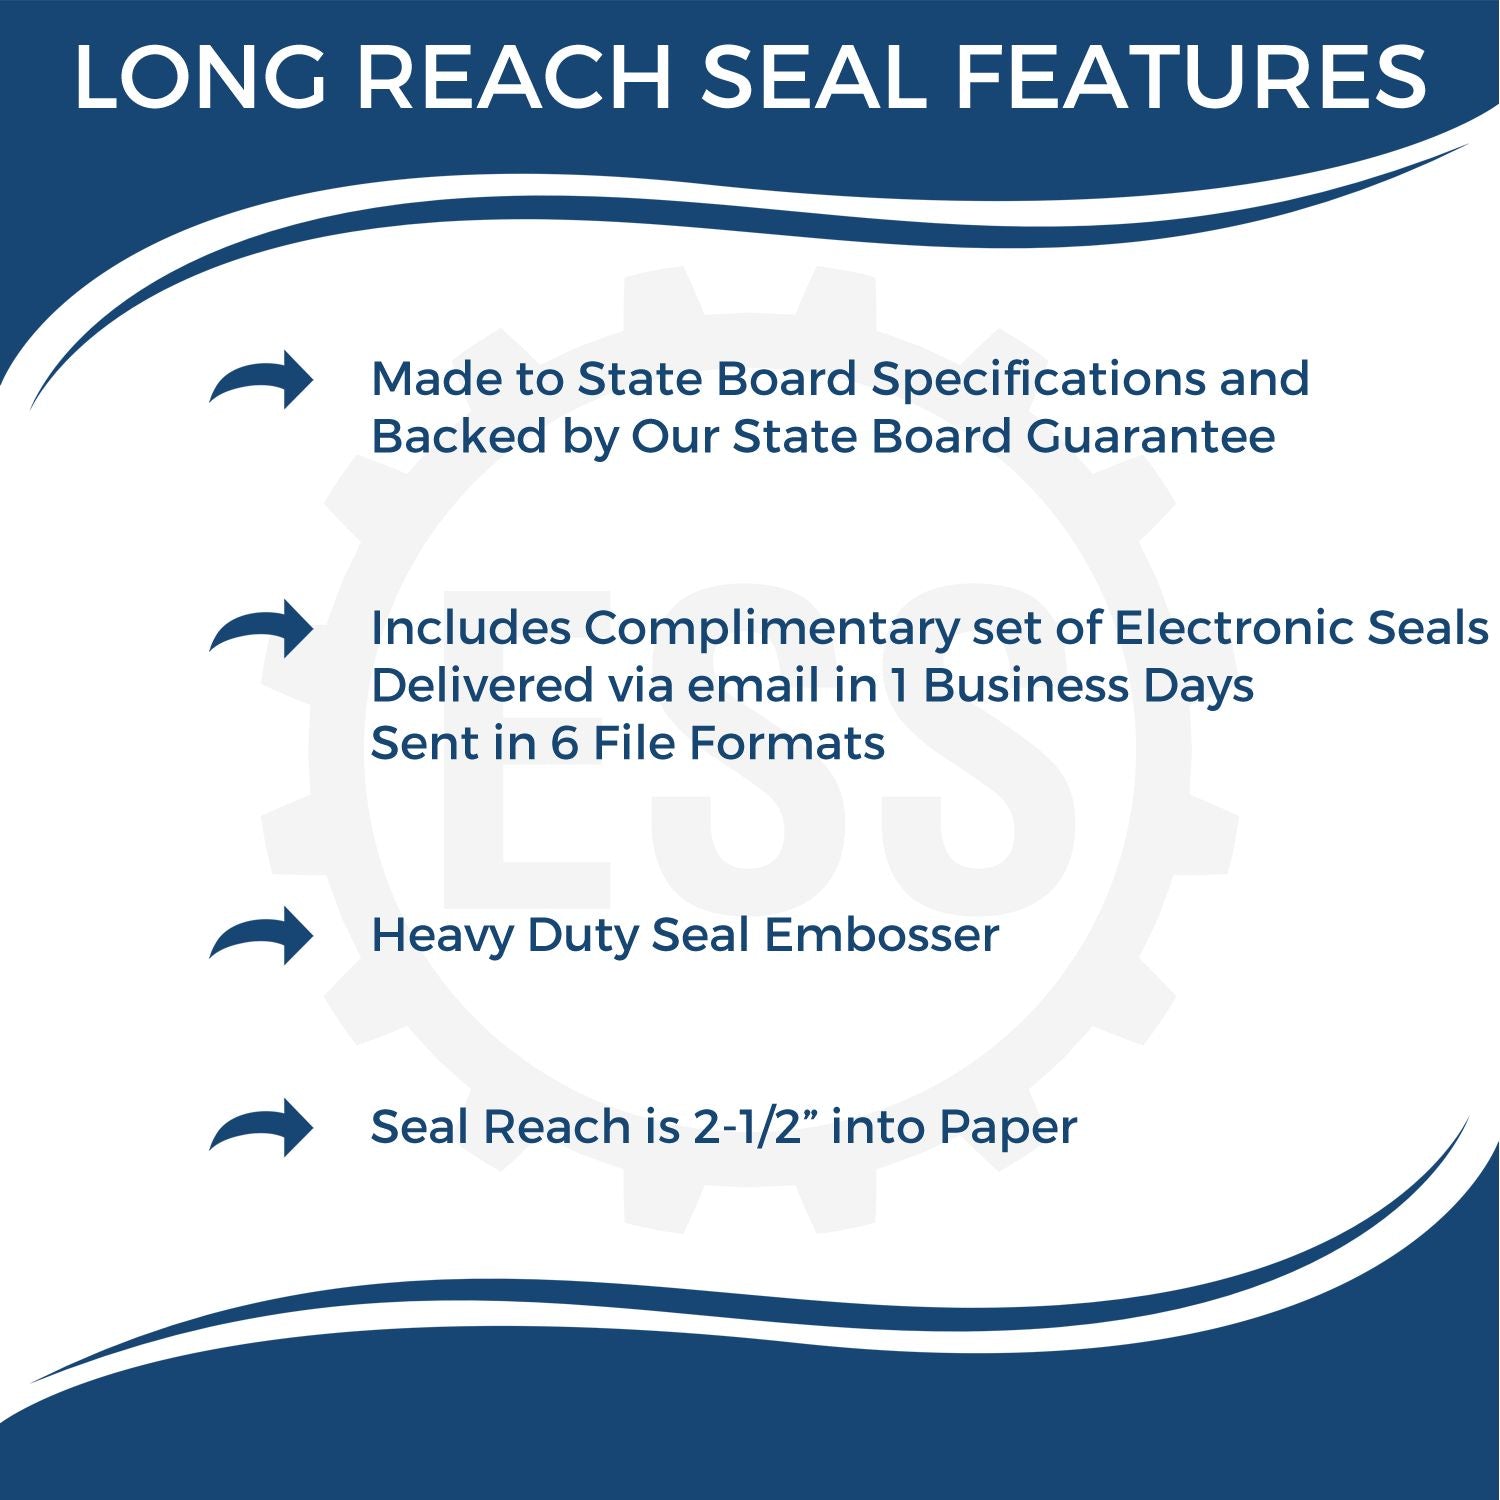 The main image for the Long Reach Nebraska PE Seal depicting a sample of the imprint and electronic files